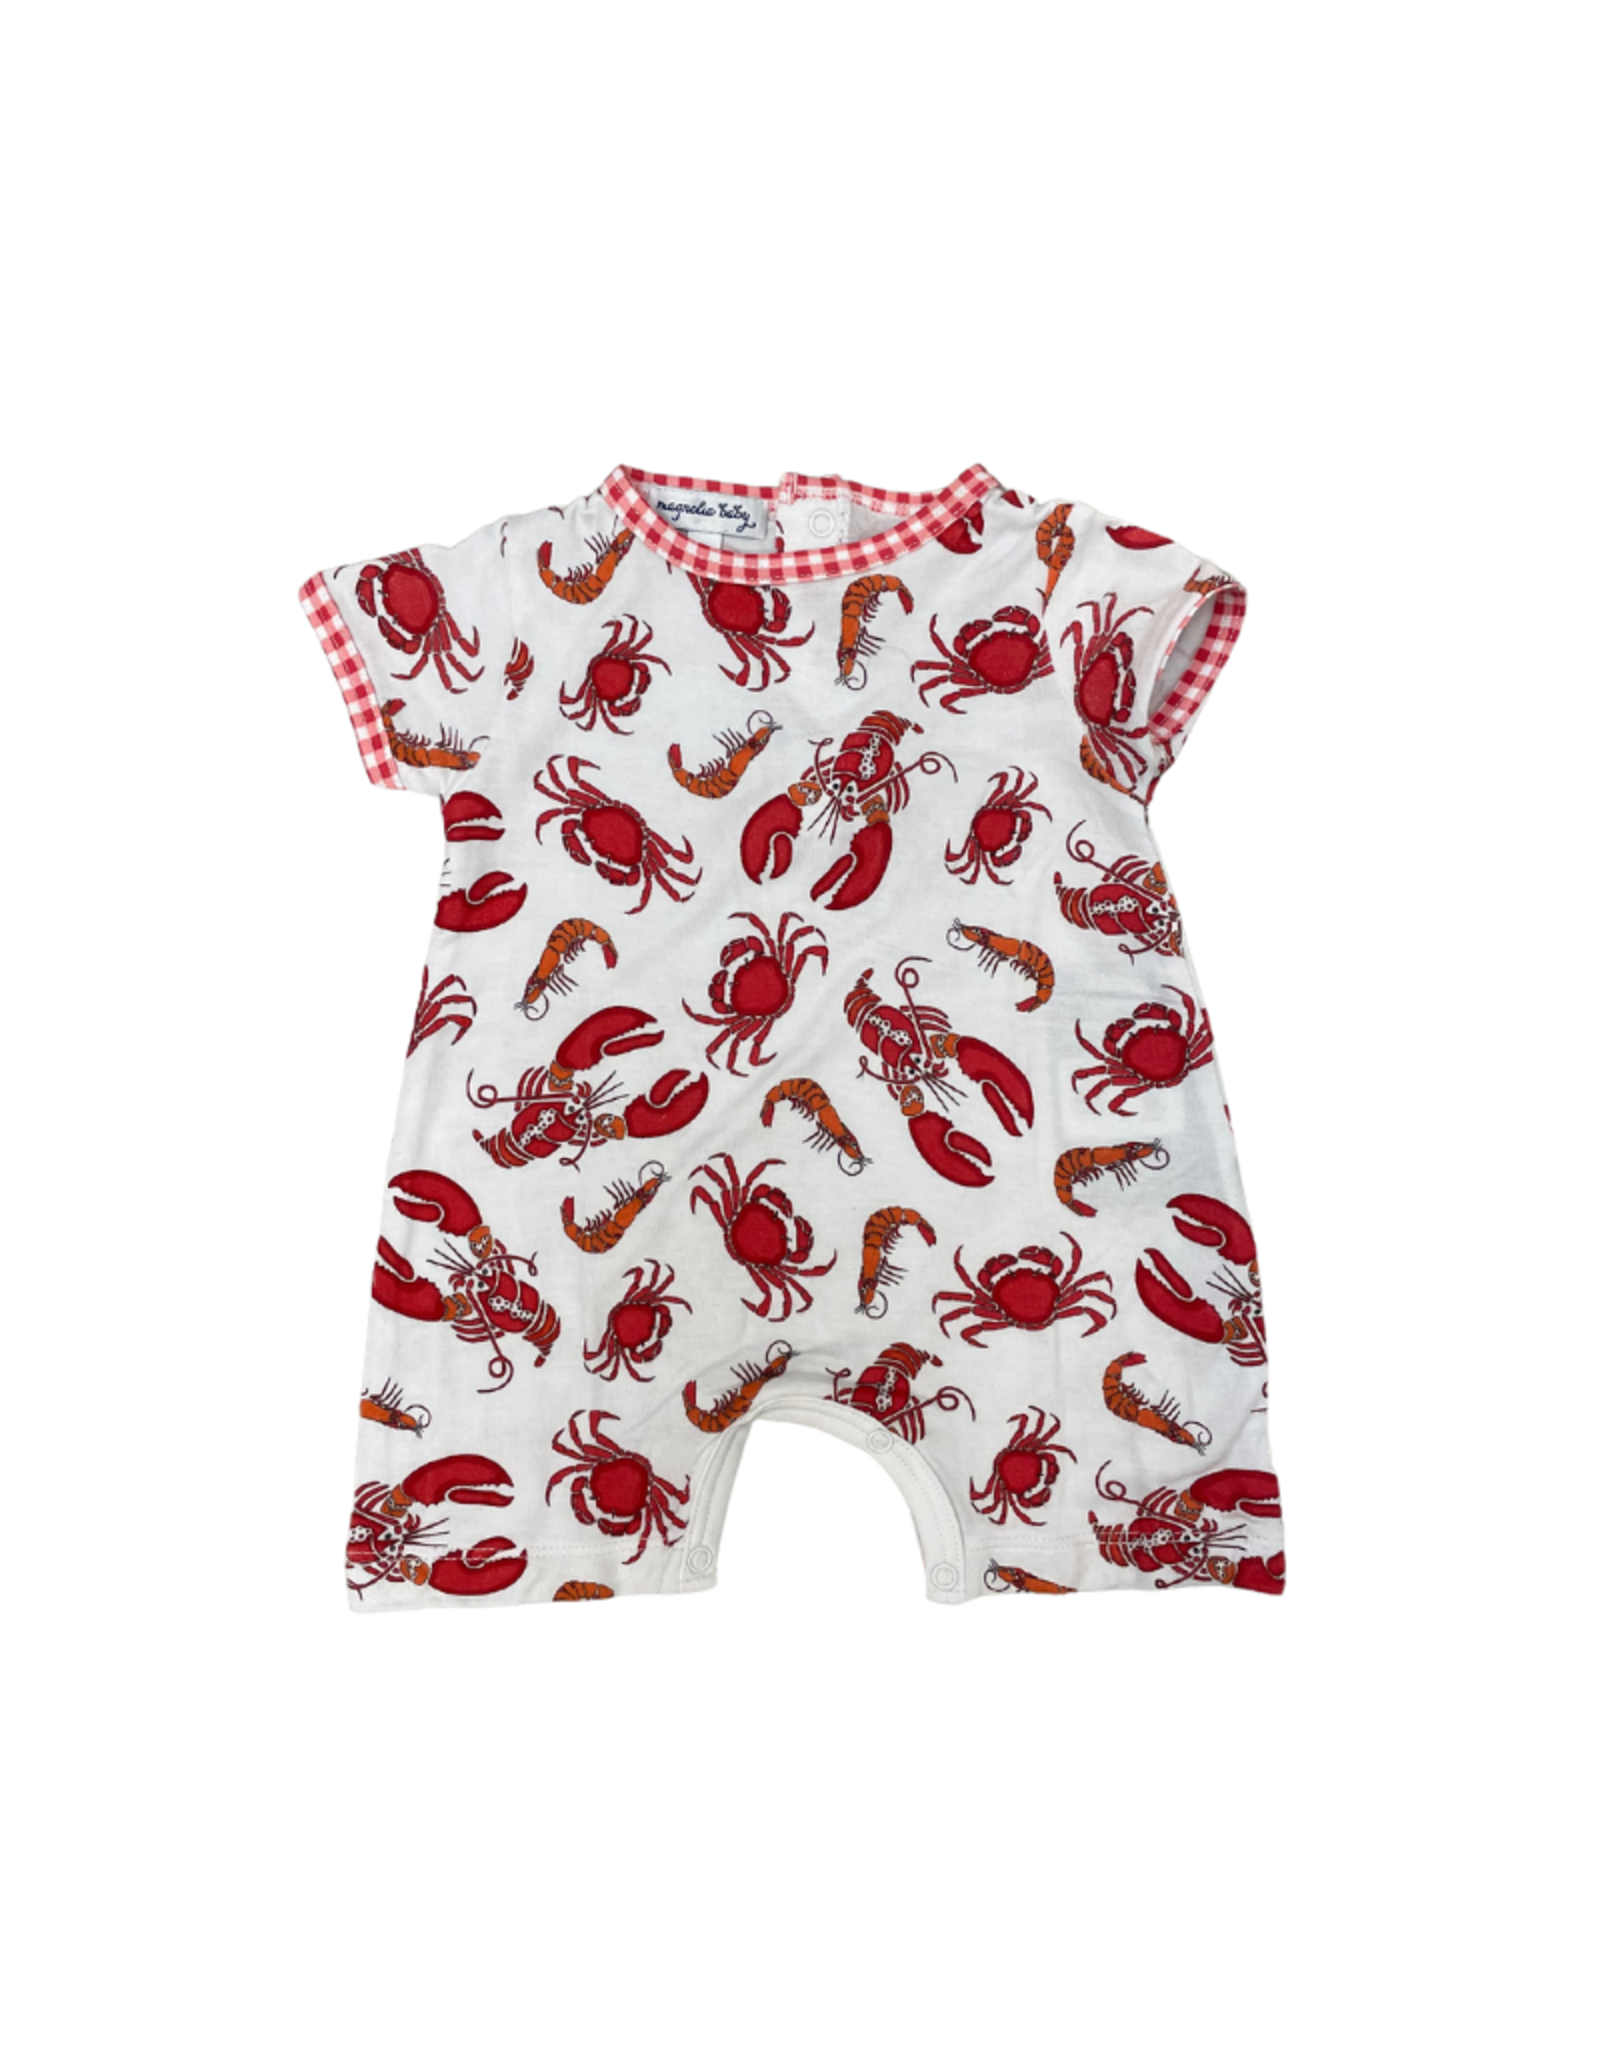 Magnolia Baby Feeling Snappy Printed Short Playsuit